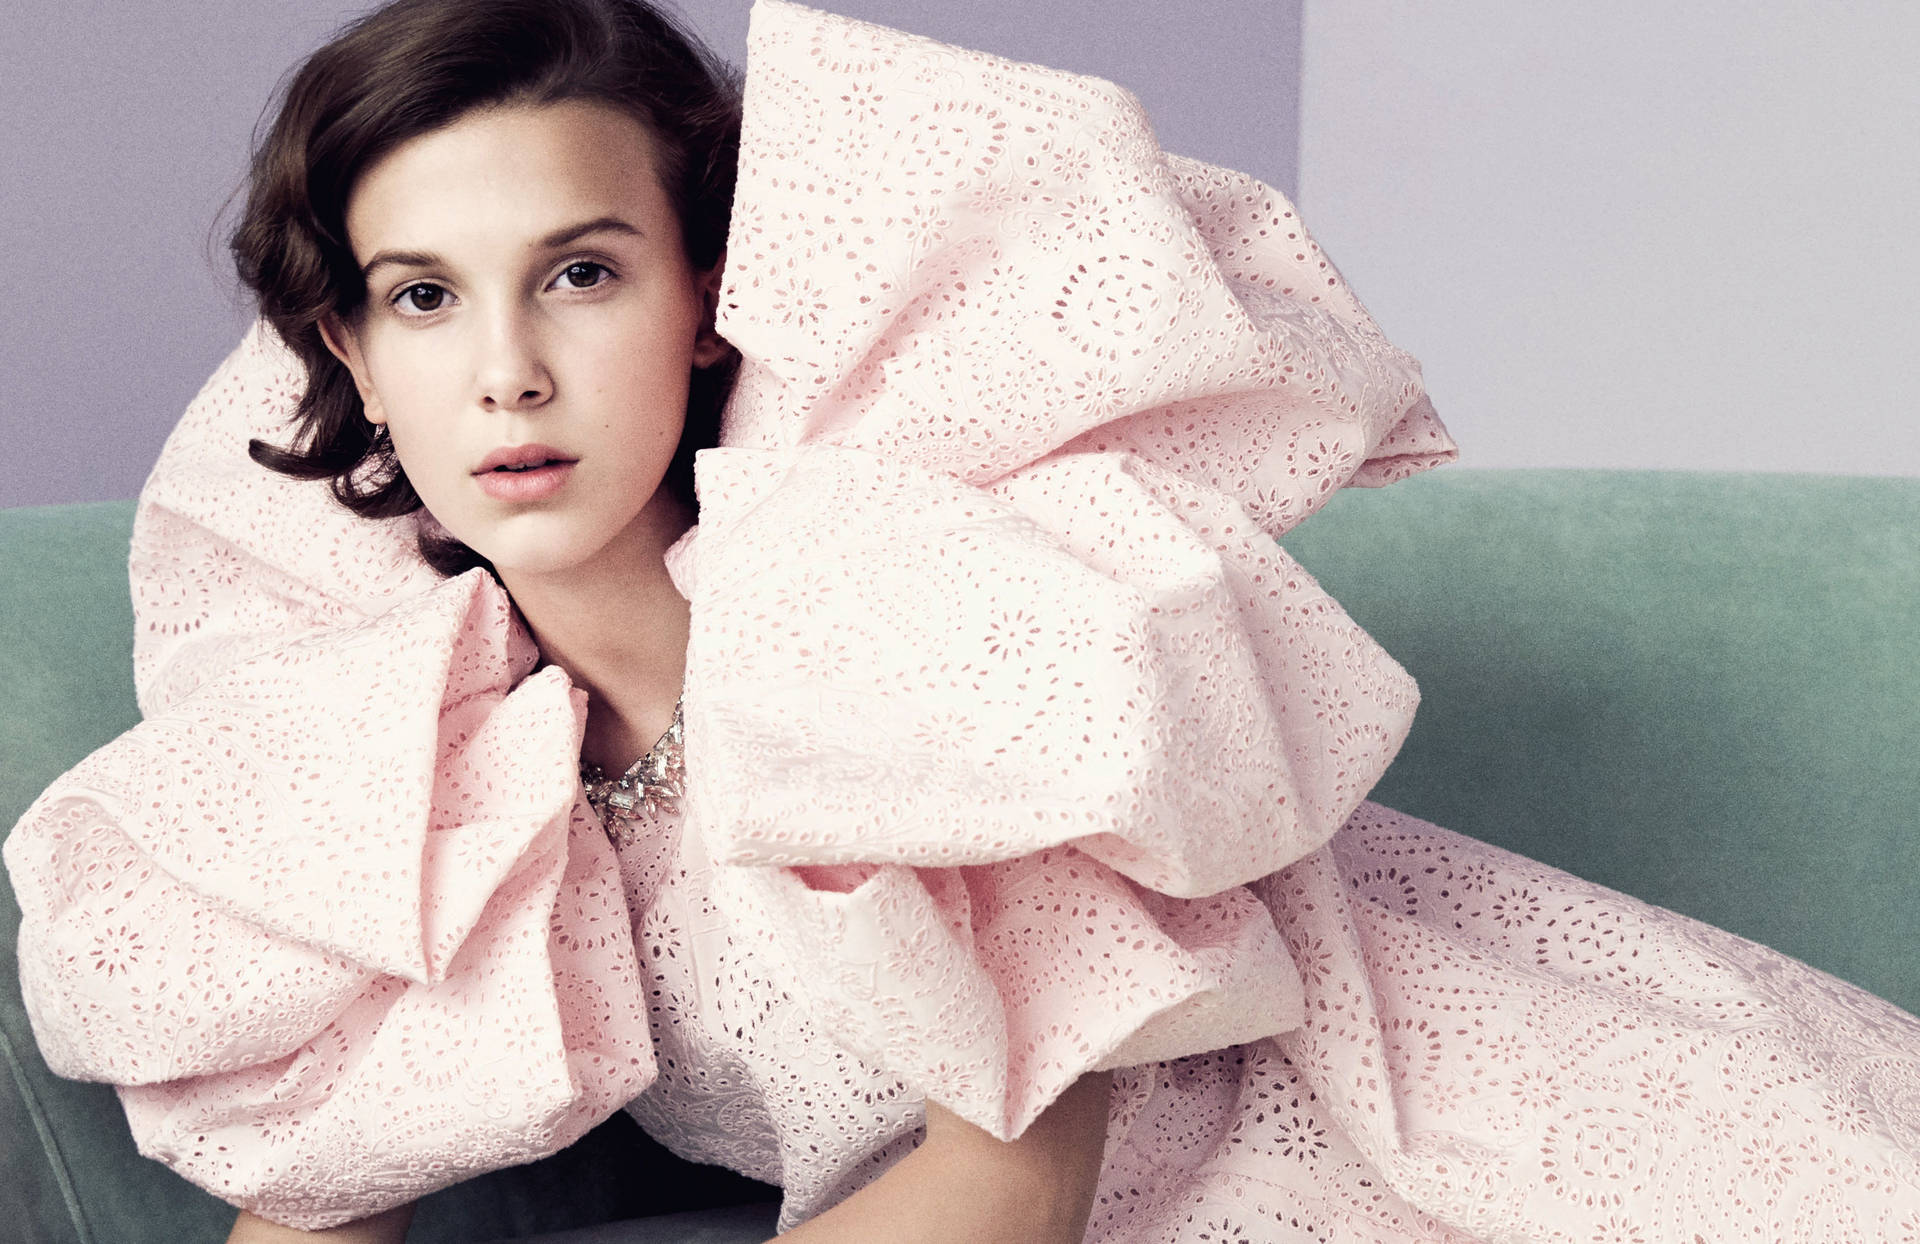 Millie Bobby Brown wearing statement puffed sleeves on the red carpet Wallpaper